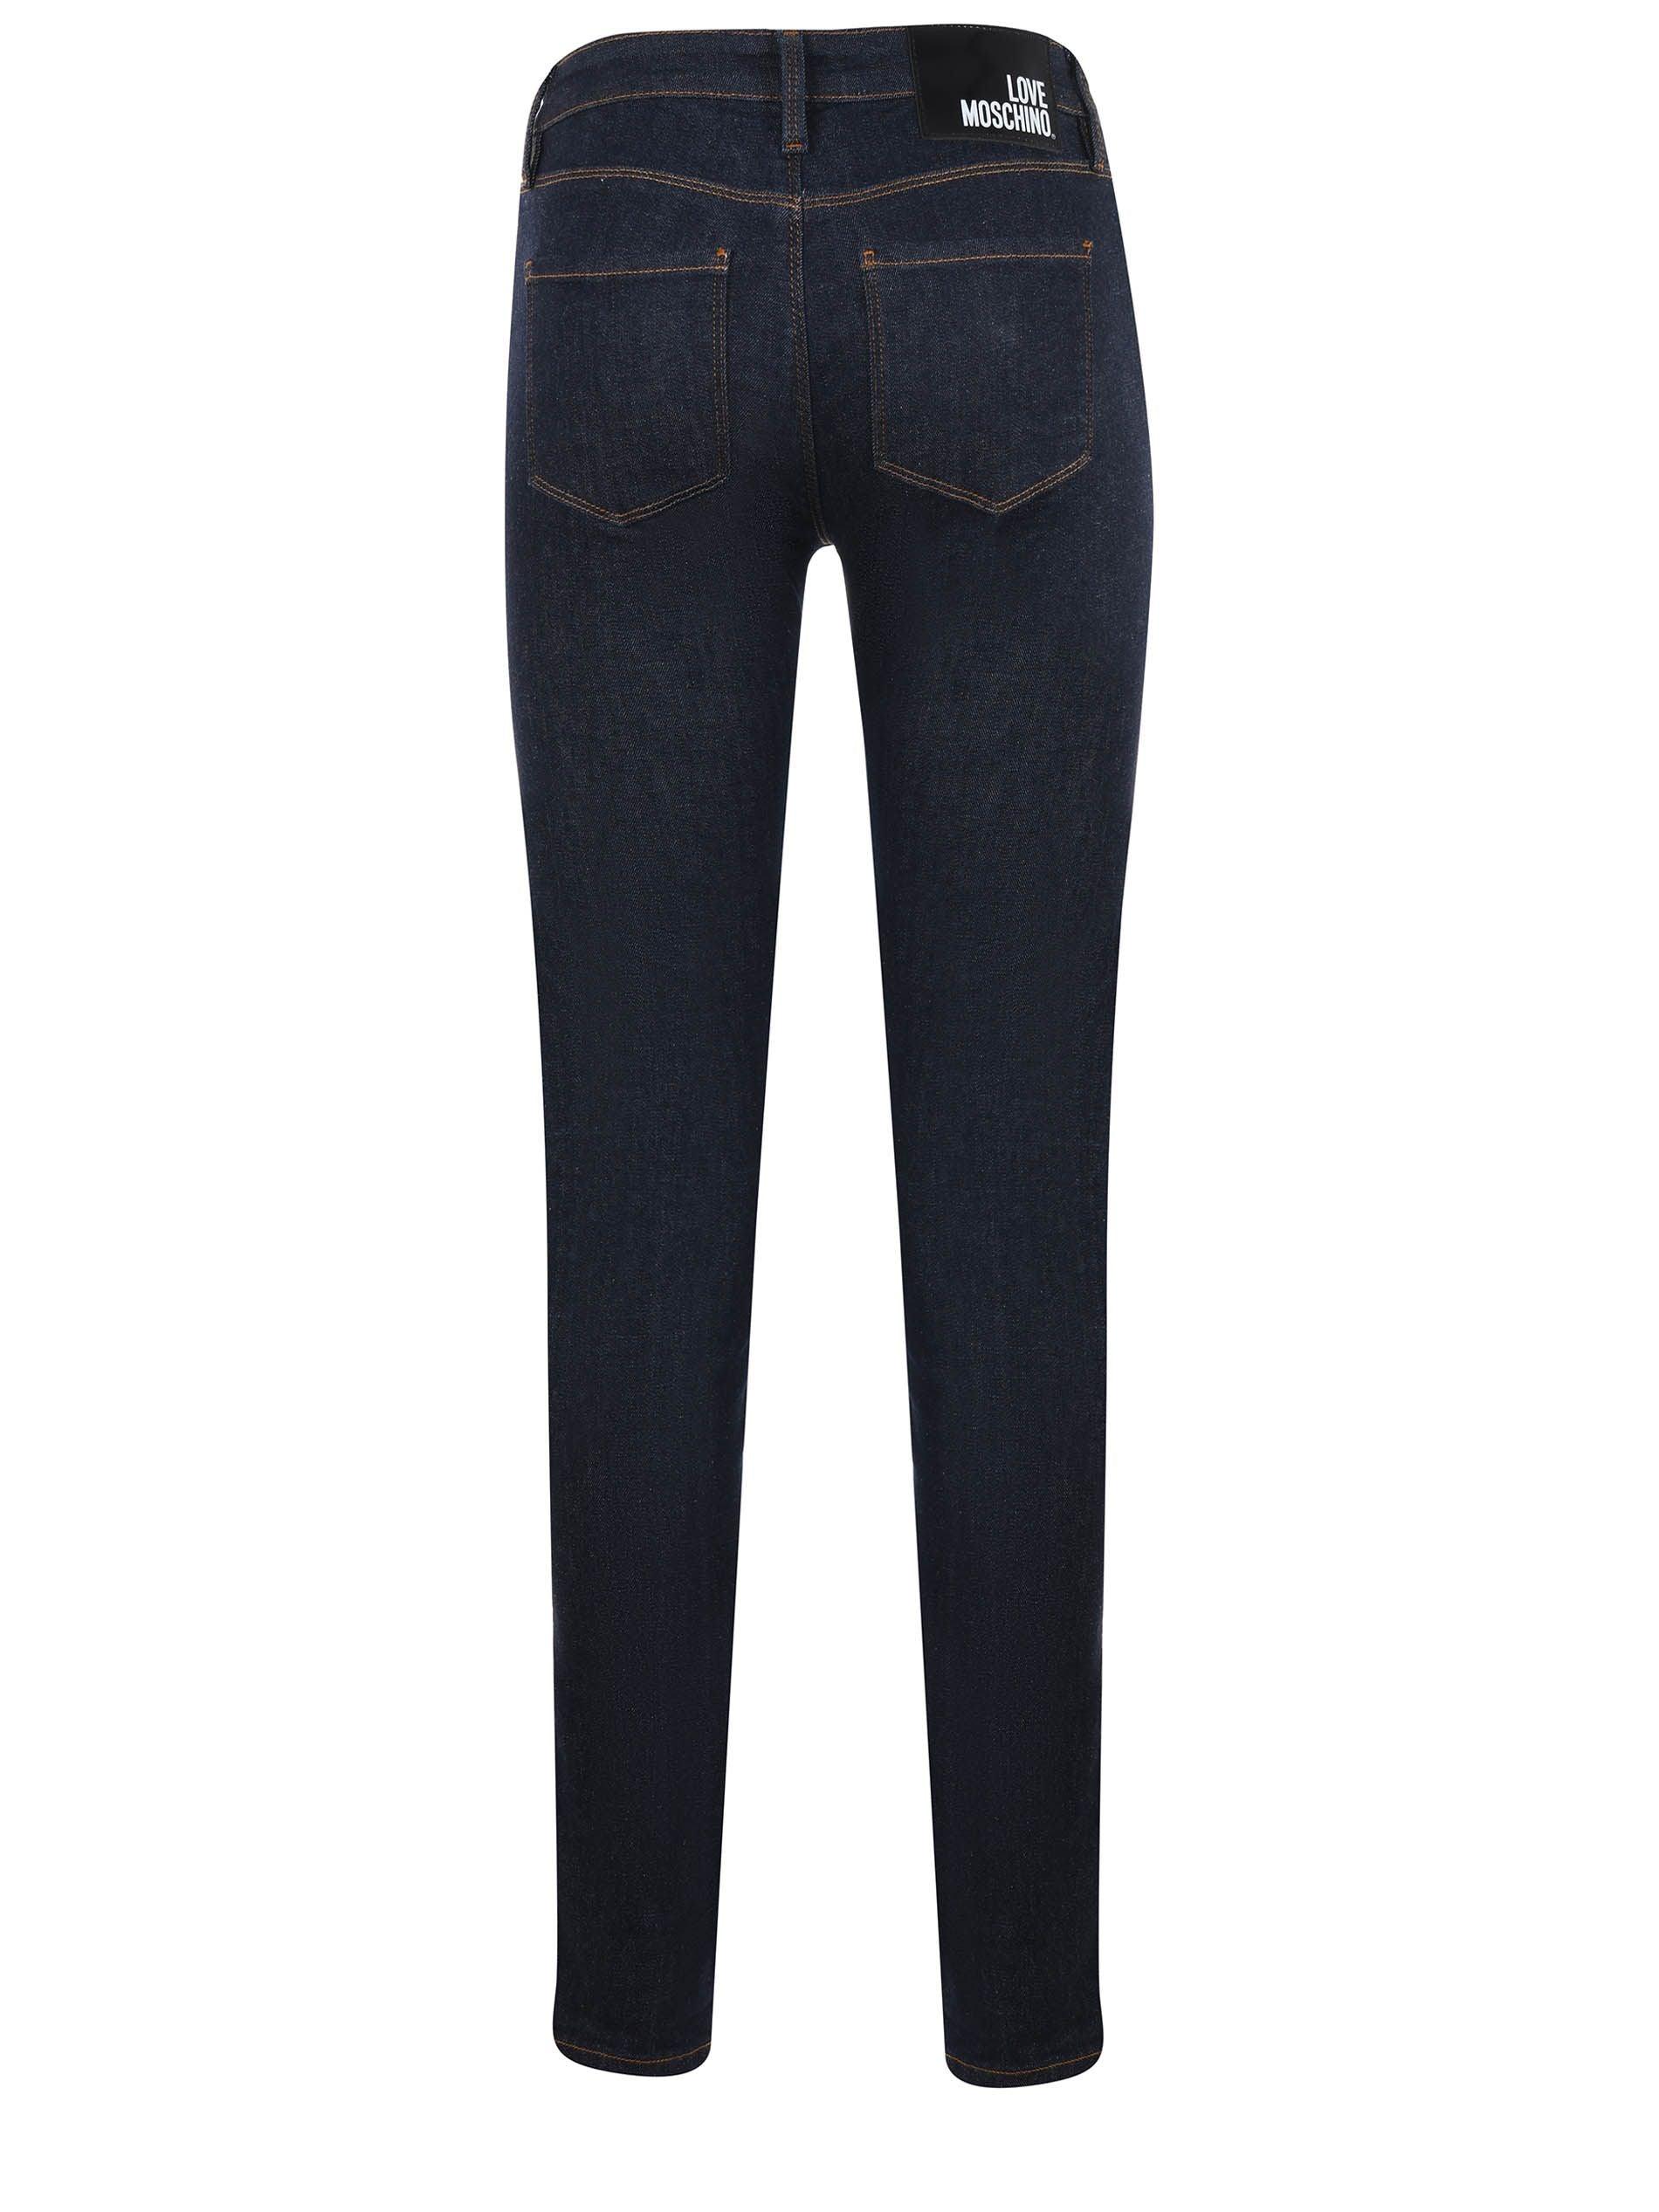 Love Moschino Women's Dark Blue Stretch Slim Fit Jeans designed by Love Moschino available from Moon Behind The Hill 's Clothing > Pants > Womens range